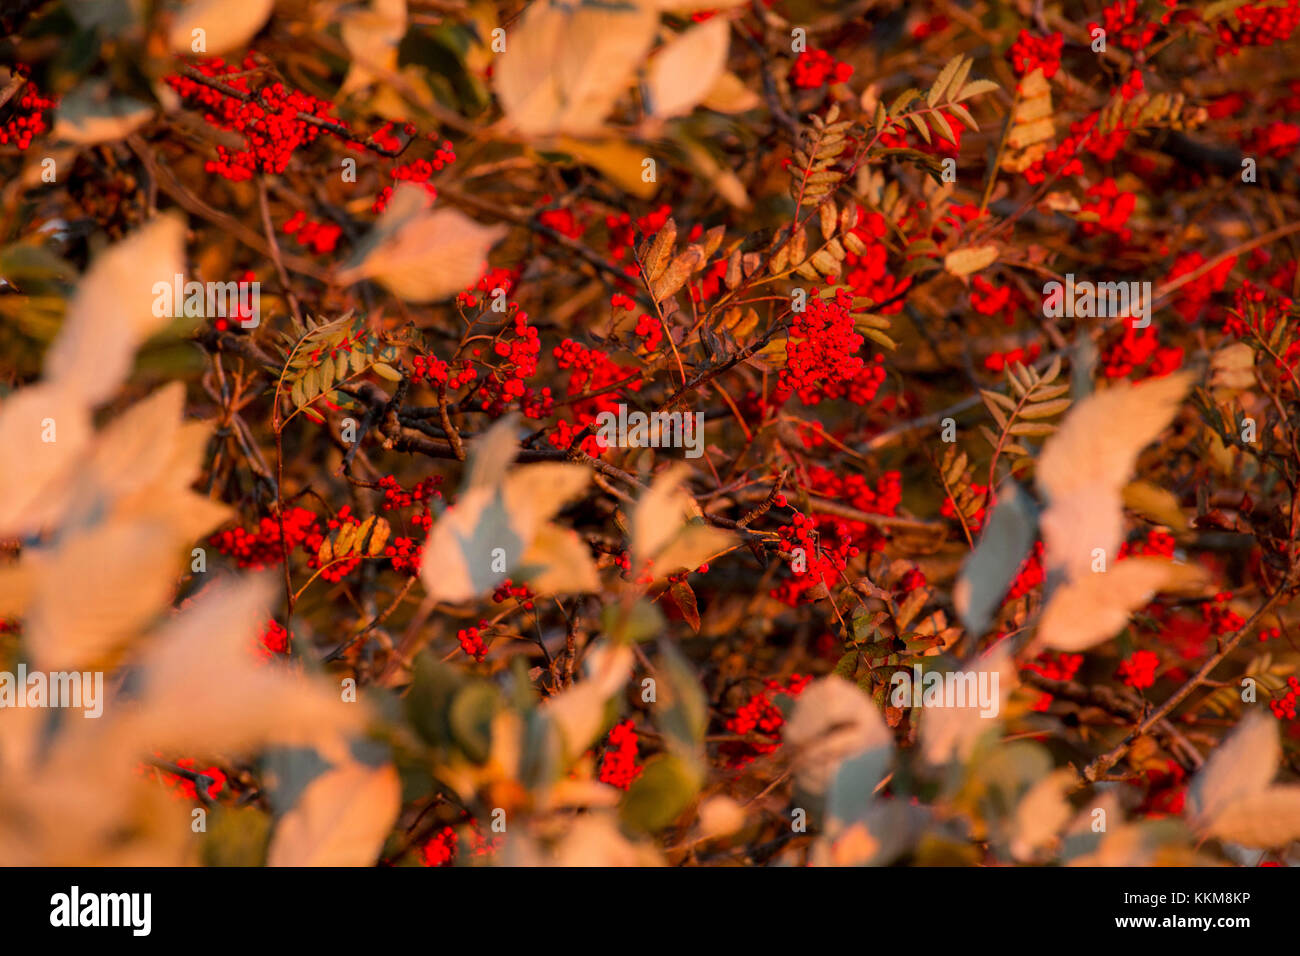 Shrub with red berries in autumn, close-up Stock Photo